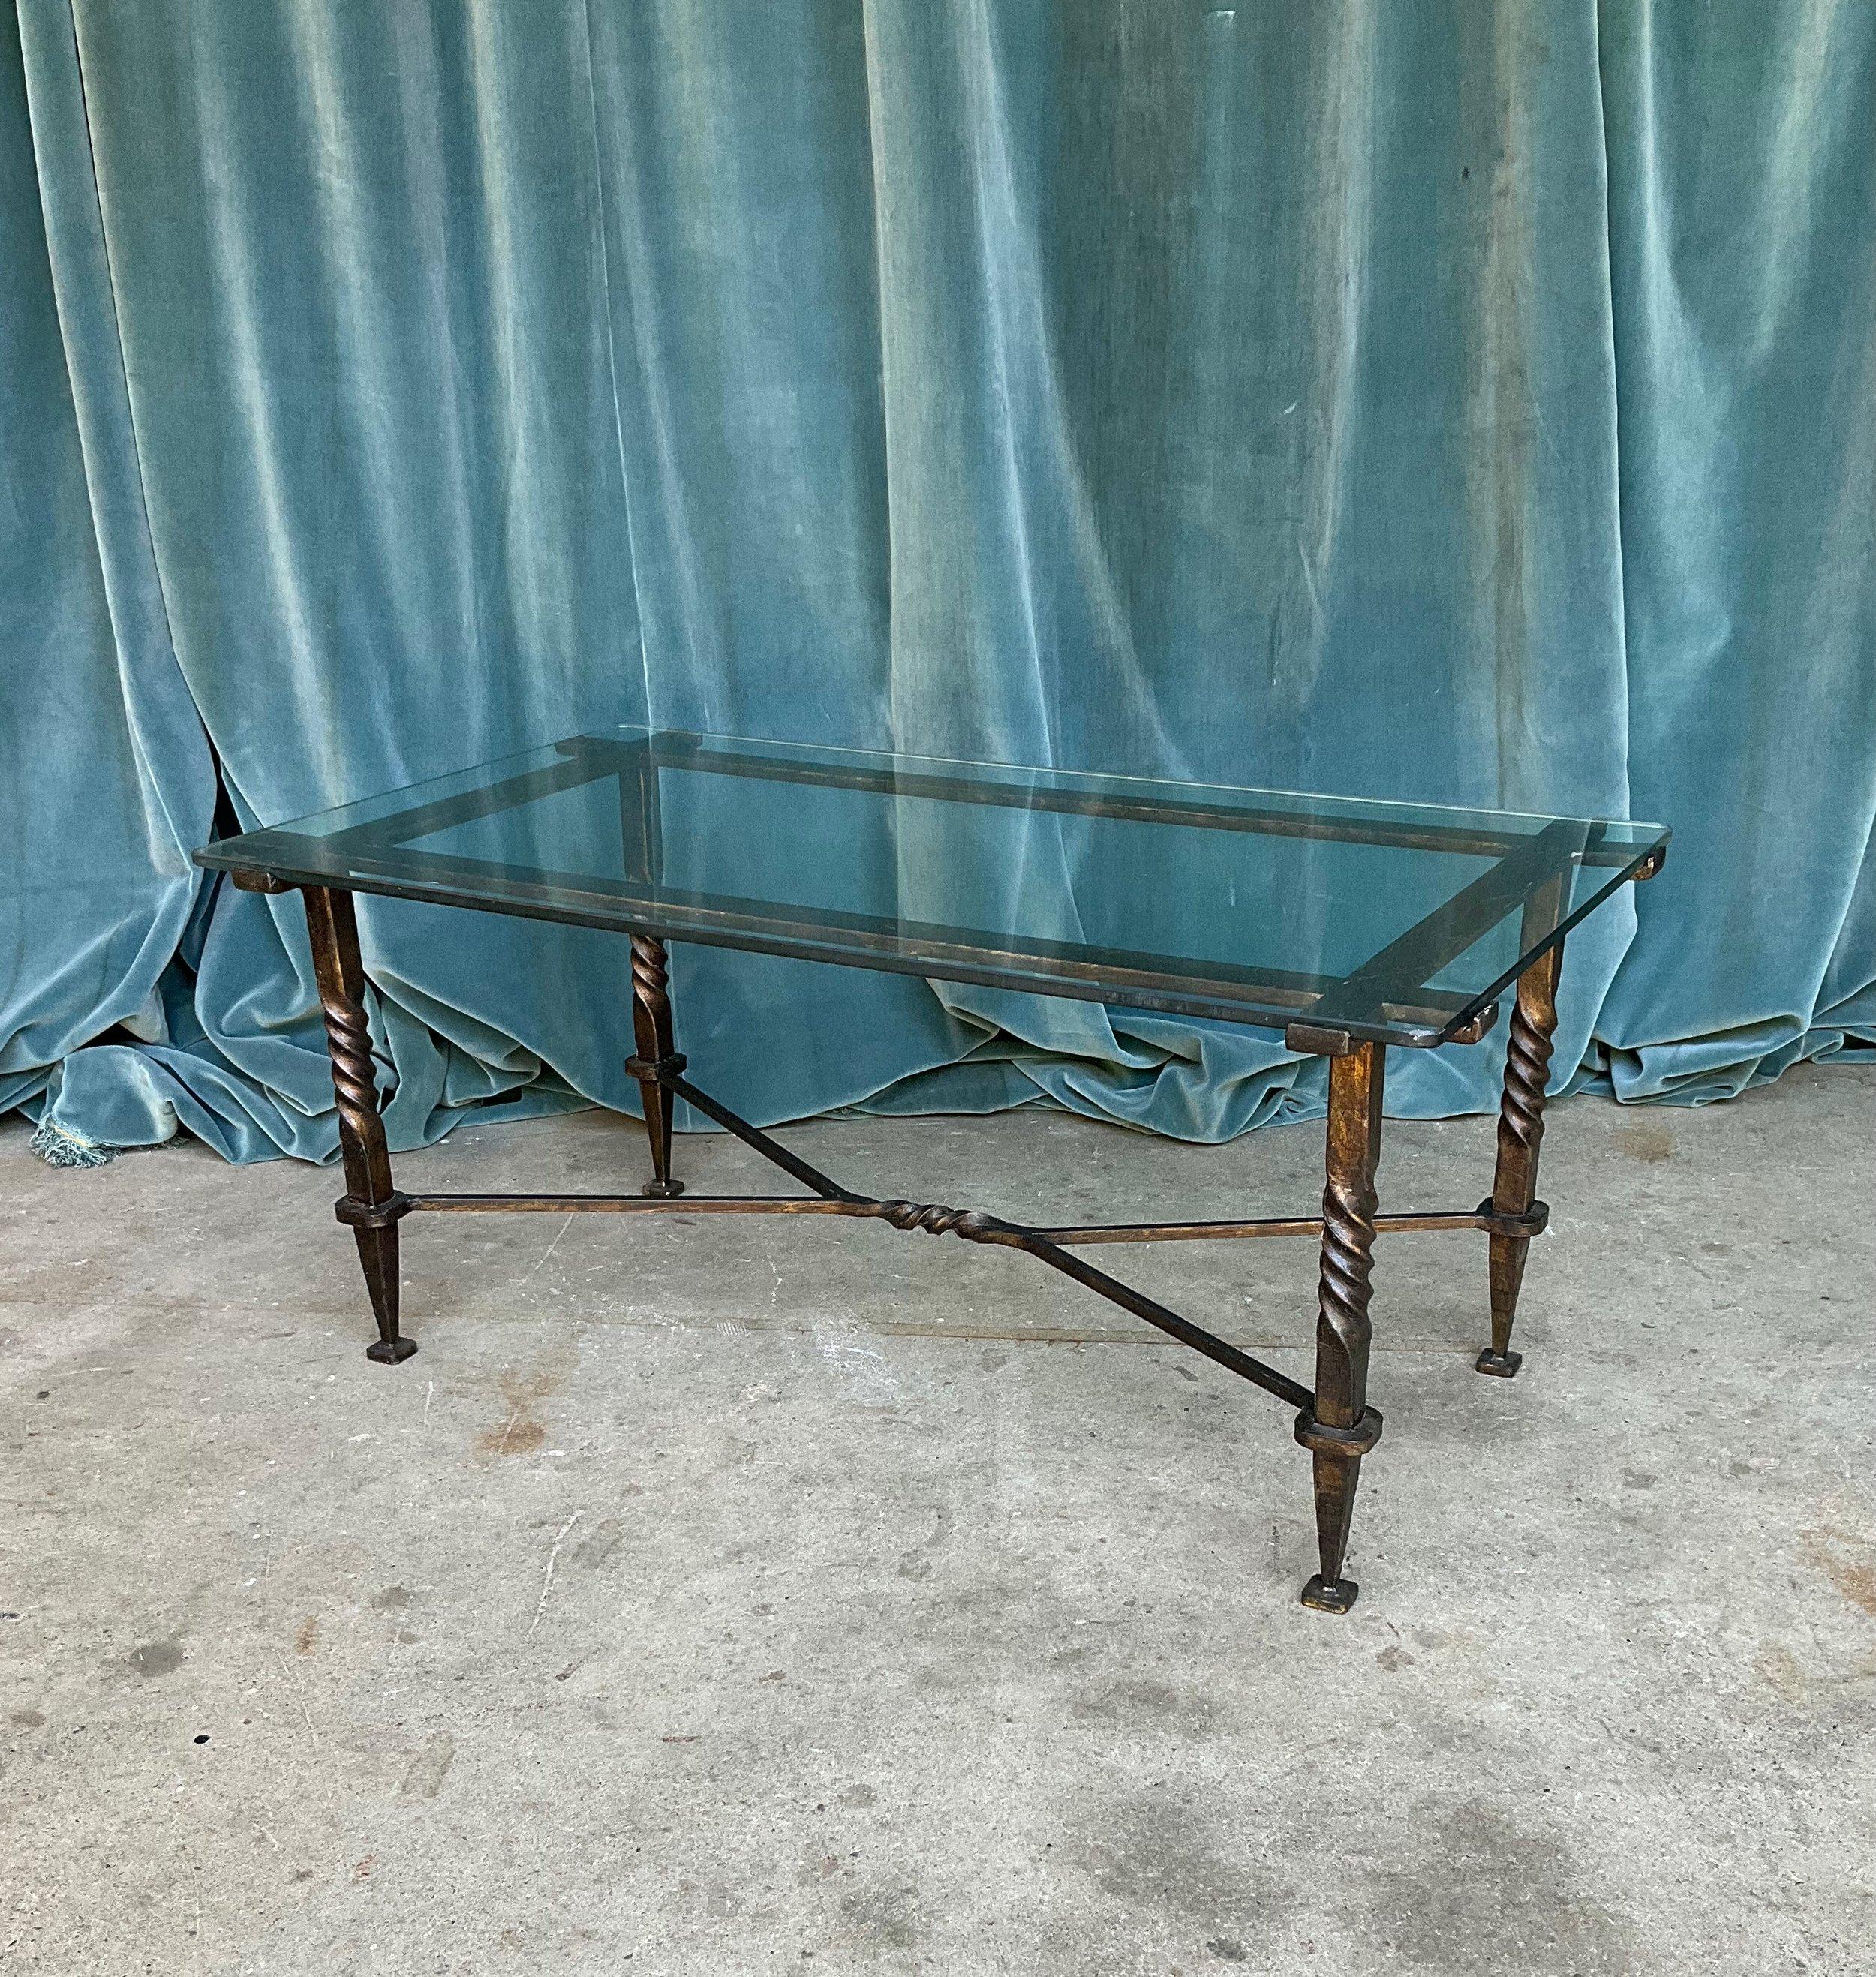 An exceptional French Modernist coffee table from the 1940s, masterfully crafted in wrought iron and clear glass. The clear glass top, featuring rounded corners, is securely held in place by eight extended iron elements that not only provide